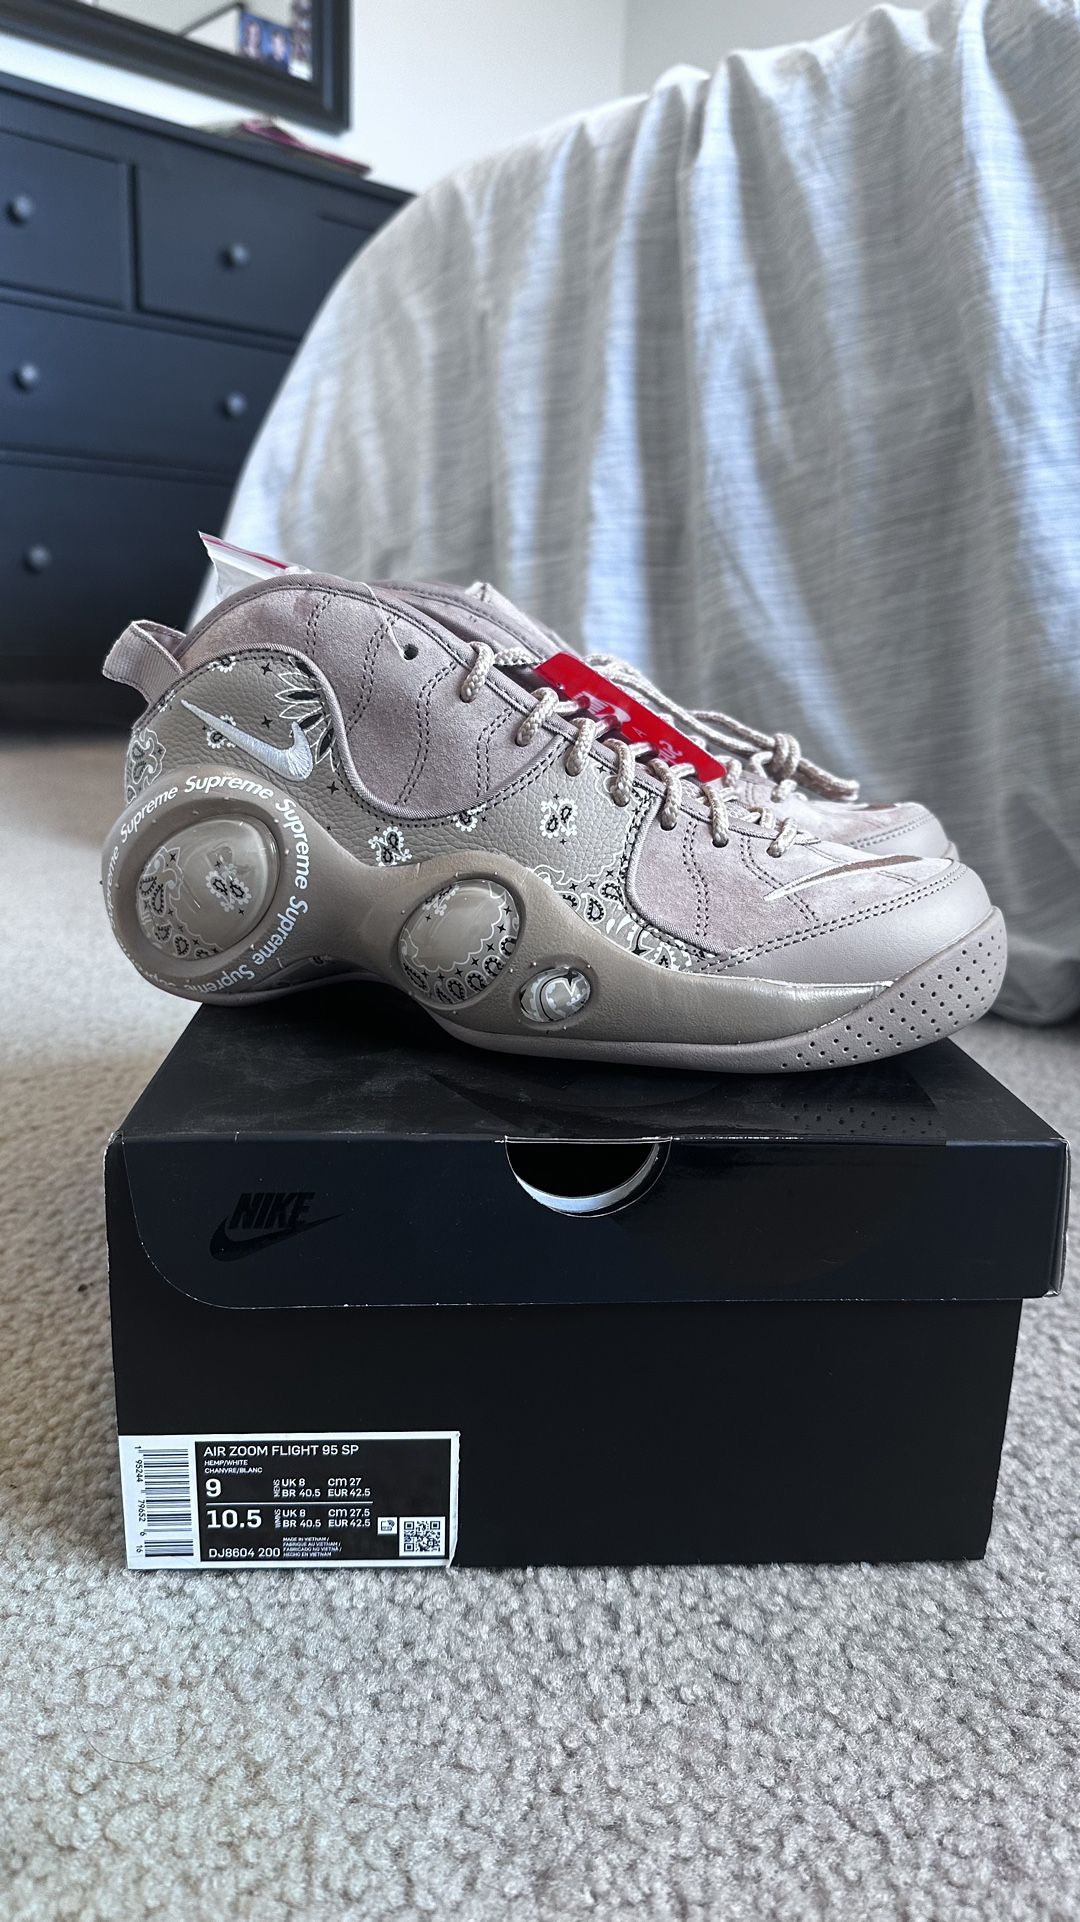 Nike Air Zoom Flight 95 SP - Supreme for Sale in Irvine, CA - OfferUp